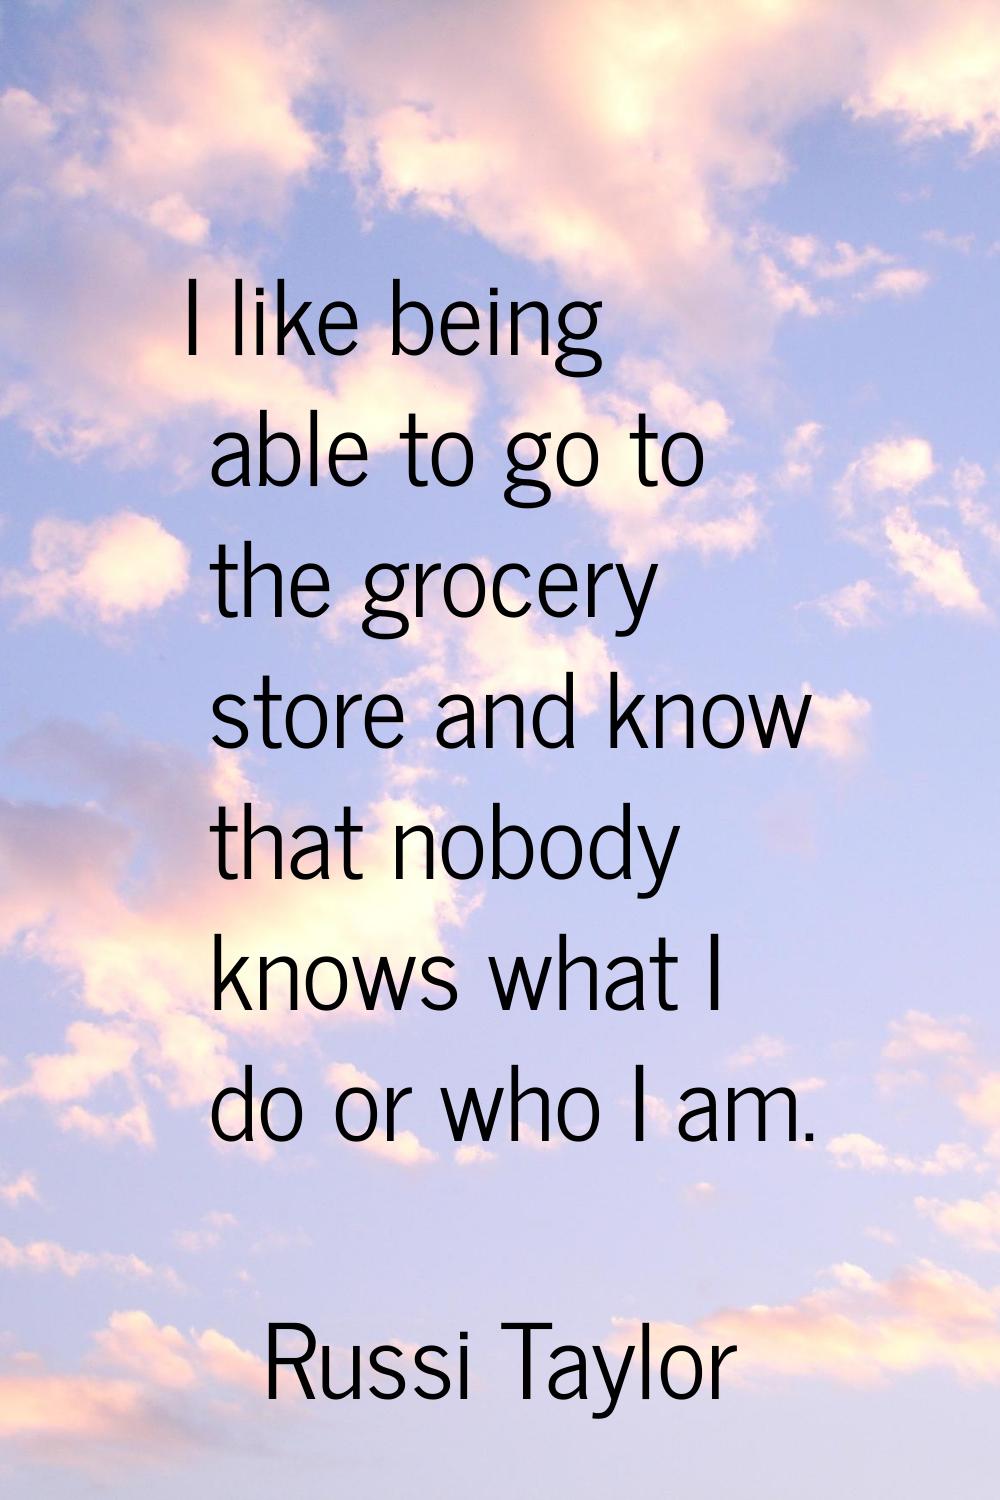 I like being able to go to the grocery store and know that nobody knows what I do or who I am.